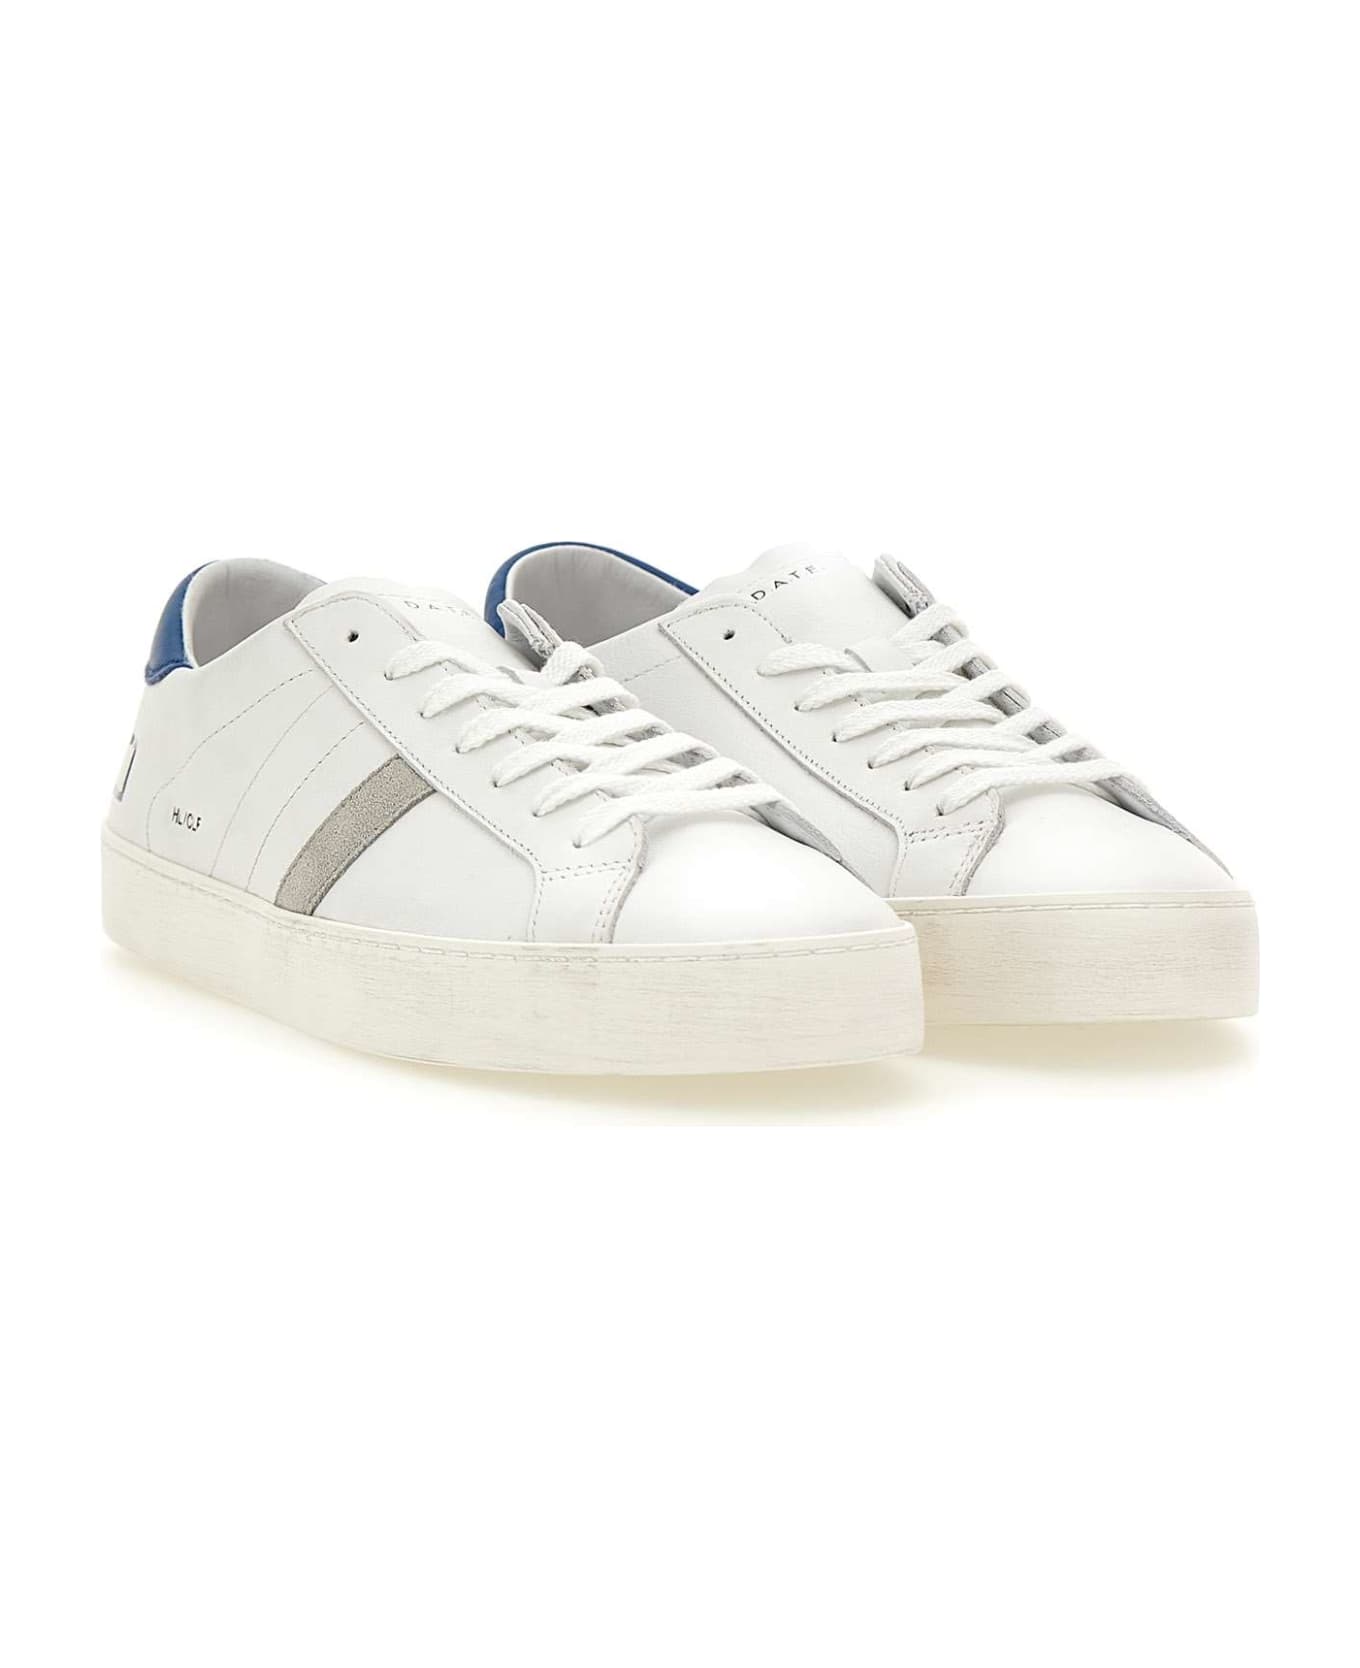 D.A.T.E. "hillow Calf" Leather Sneakers - WHITE スニーカー